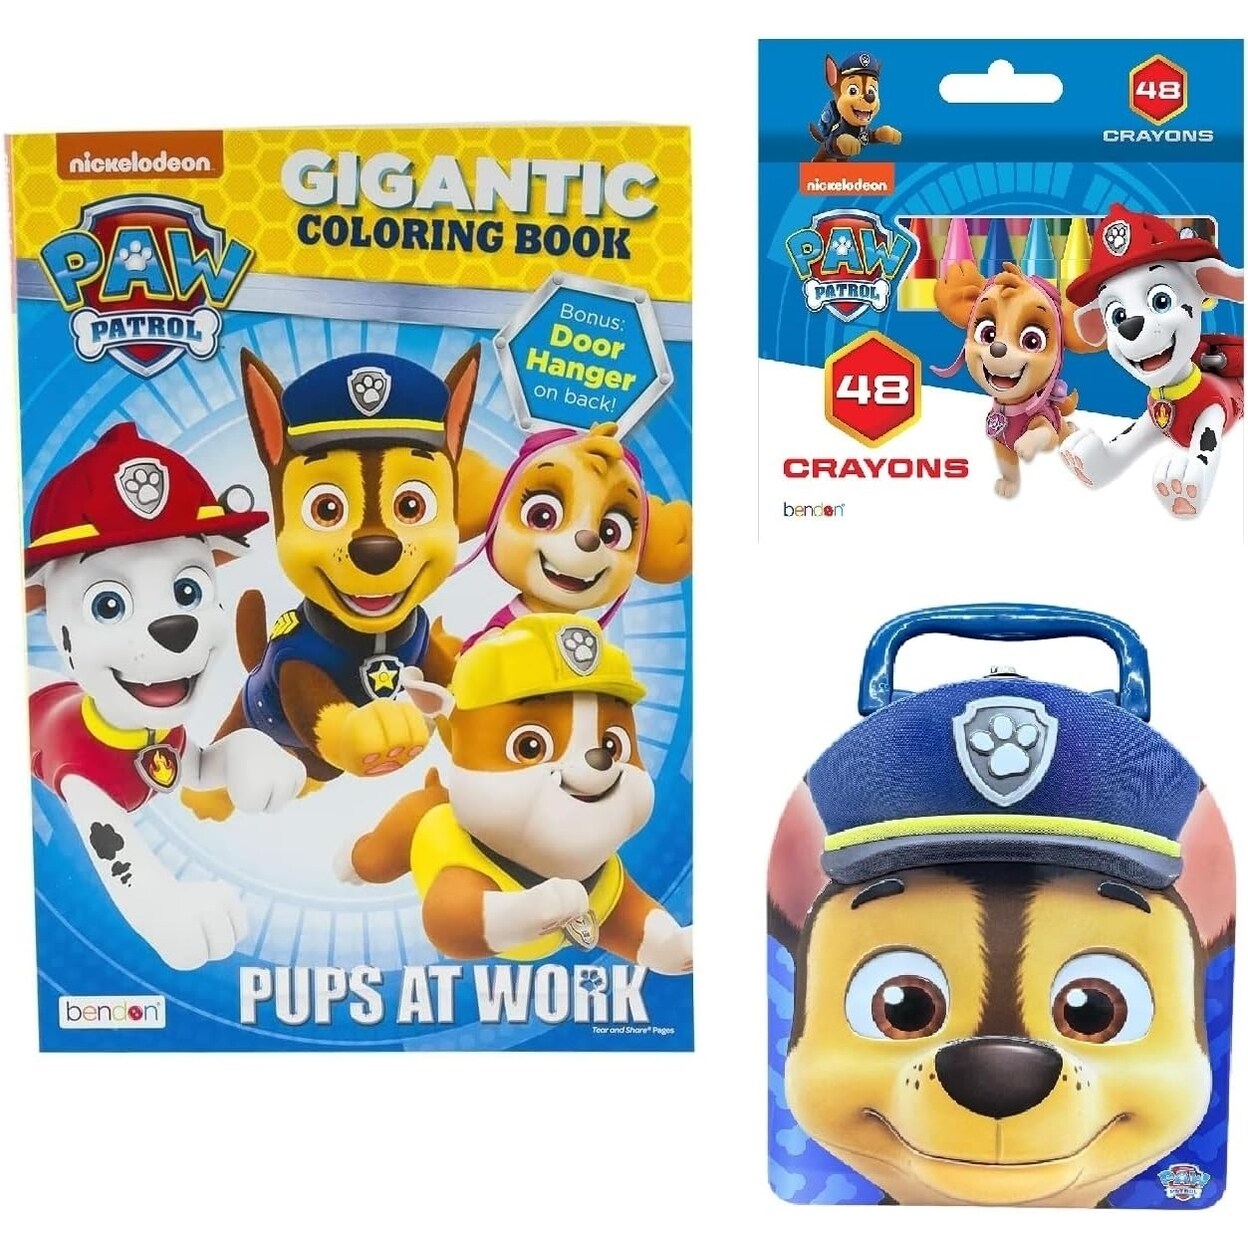 Bendon Publishing Paw Patrol Coloring Book Gift Set for Kids with 192 Coloring Pages 48 Crayons Storage Tin (Chase)